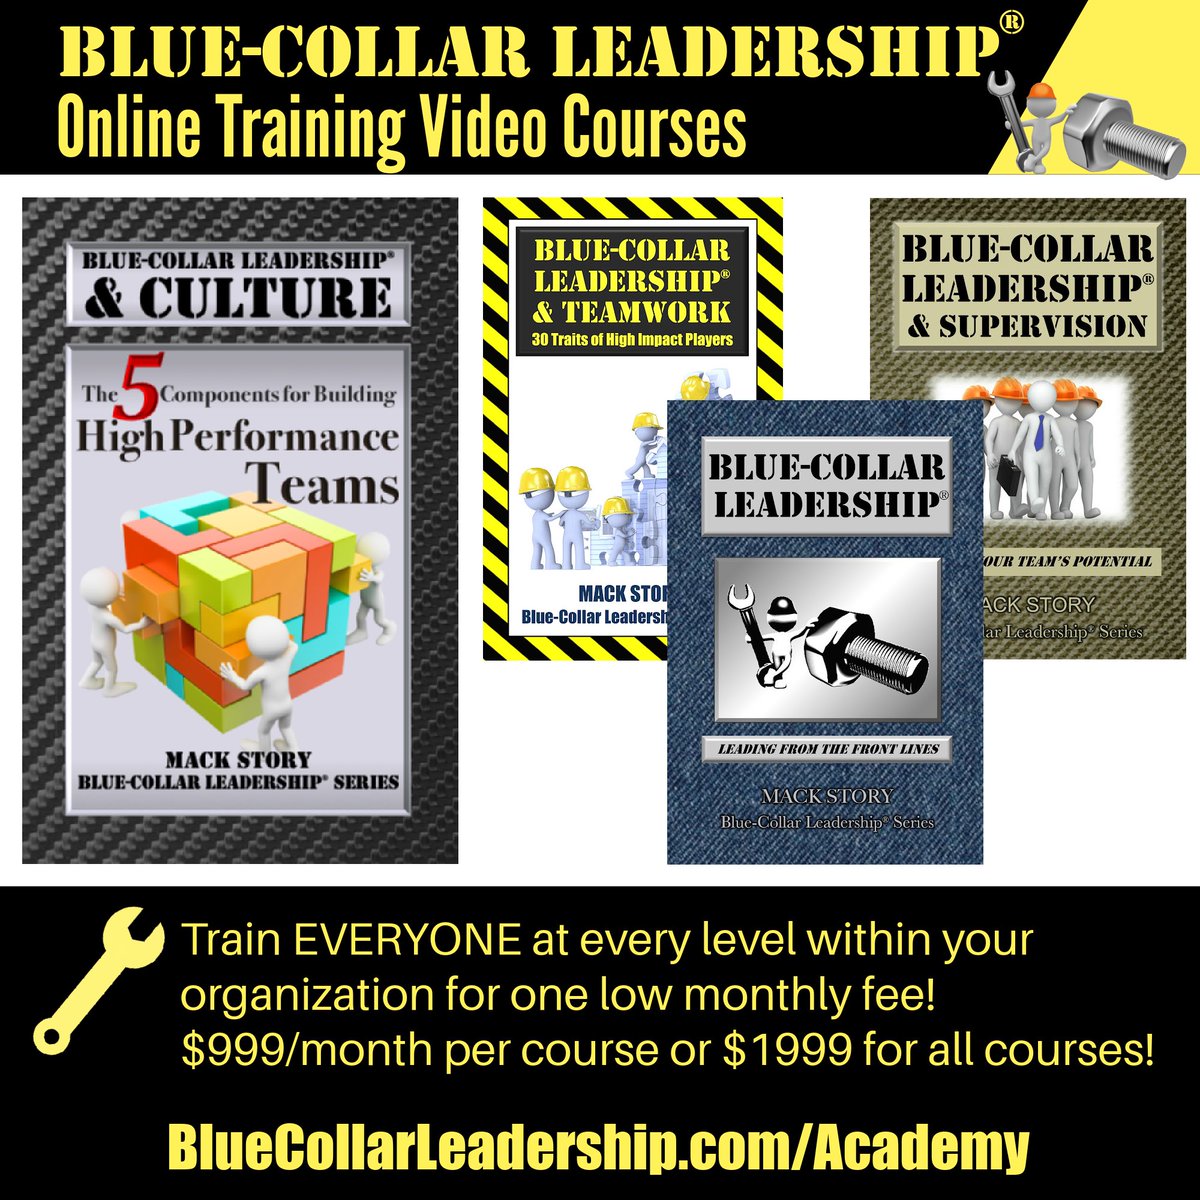 Check out our lineup of online video workforce and leadership development training courses (6 courses; 7.5 hours each) at: BlueCollarLeadership.com/Academy

#workforcedevelopment #leadershipdevelopment #organizationaldevelopment #talentdevelopment #skilledtrades #constructionindustry…